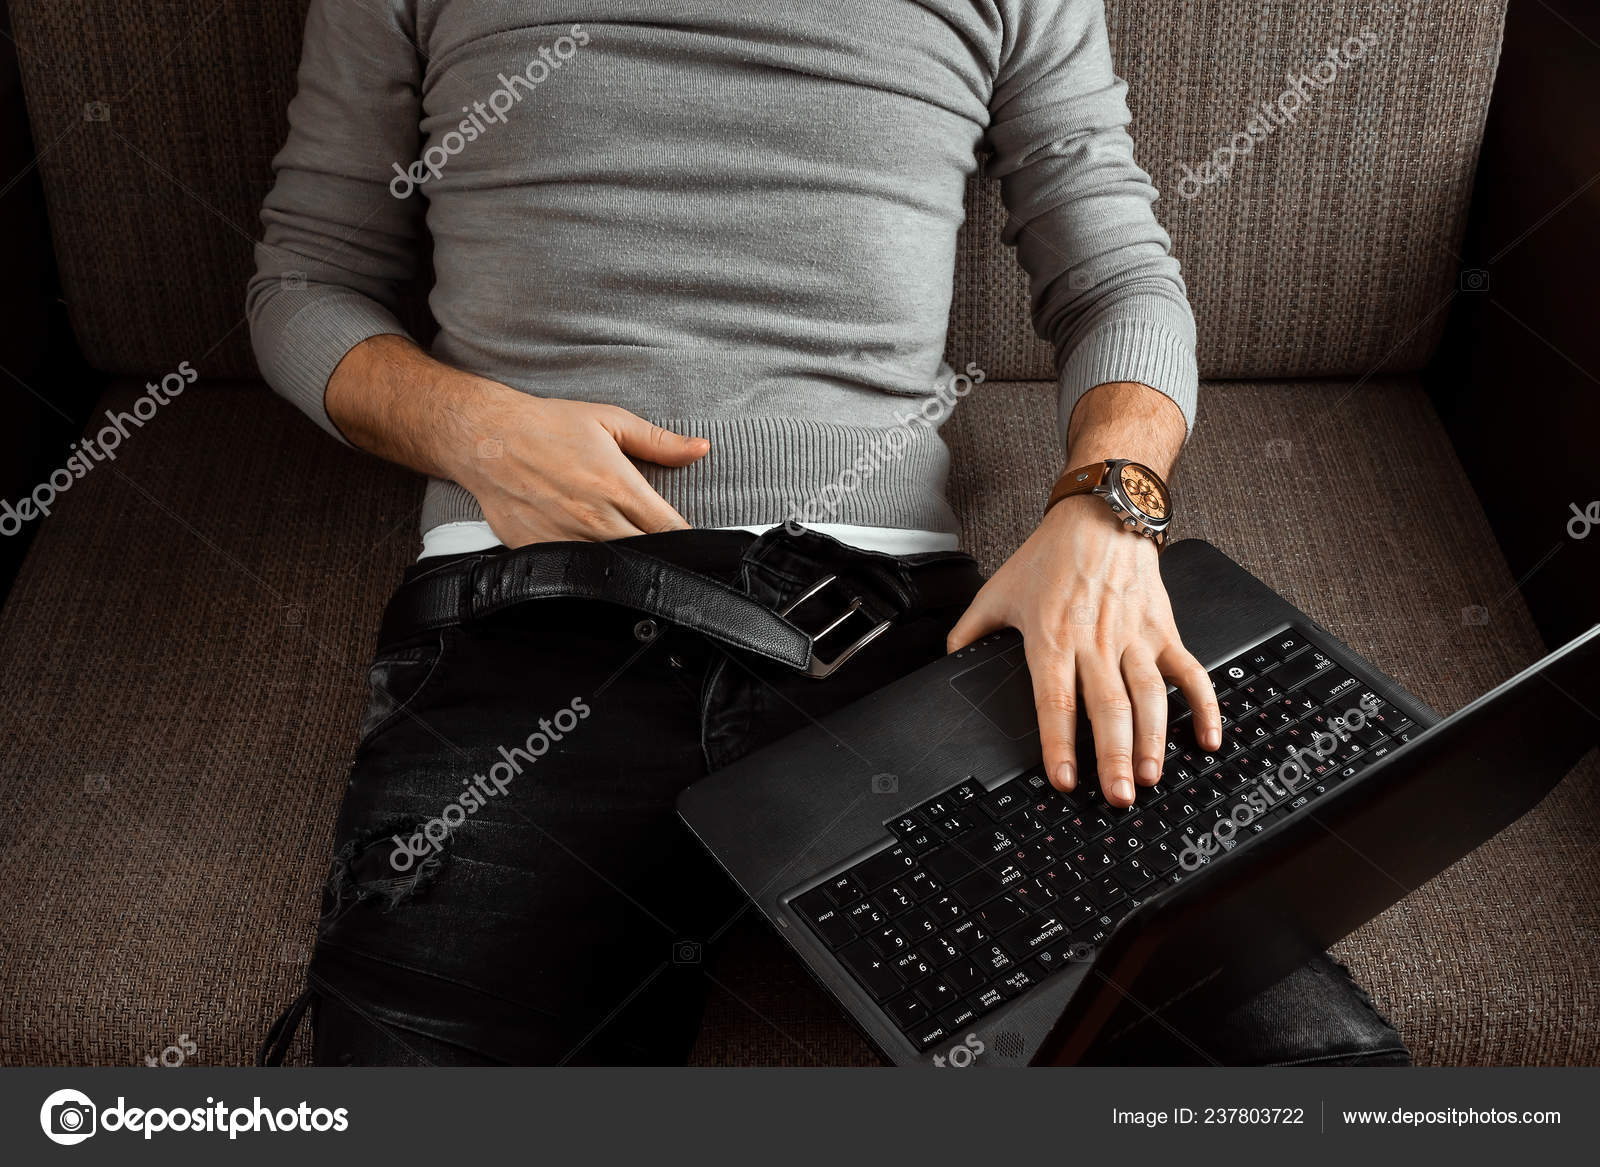 Adult Vedios Downlod - Man Watches Adult Video Laptop While Sitting Couch Concept Porn Stock Photo  by Â©MarkoAliaksandr 237803722